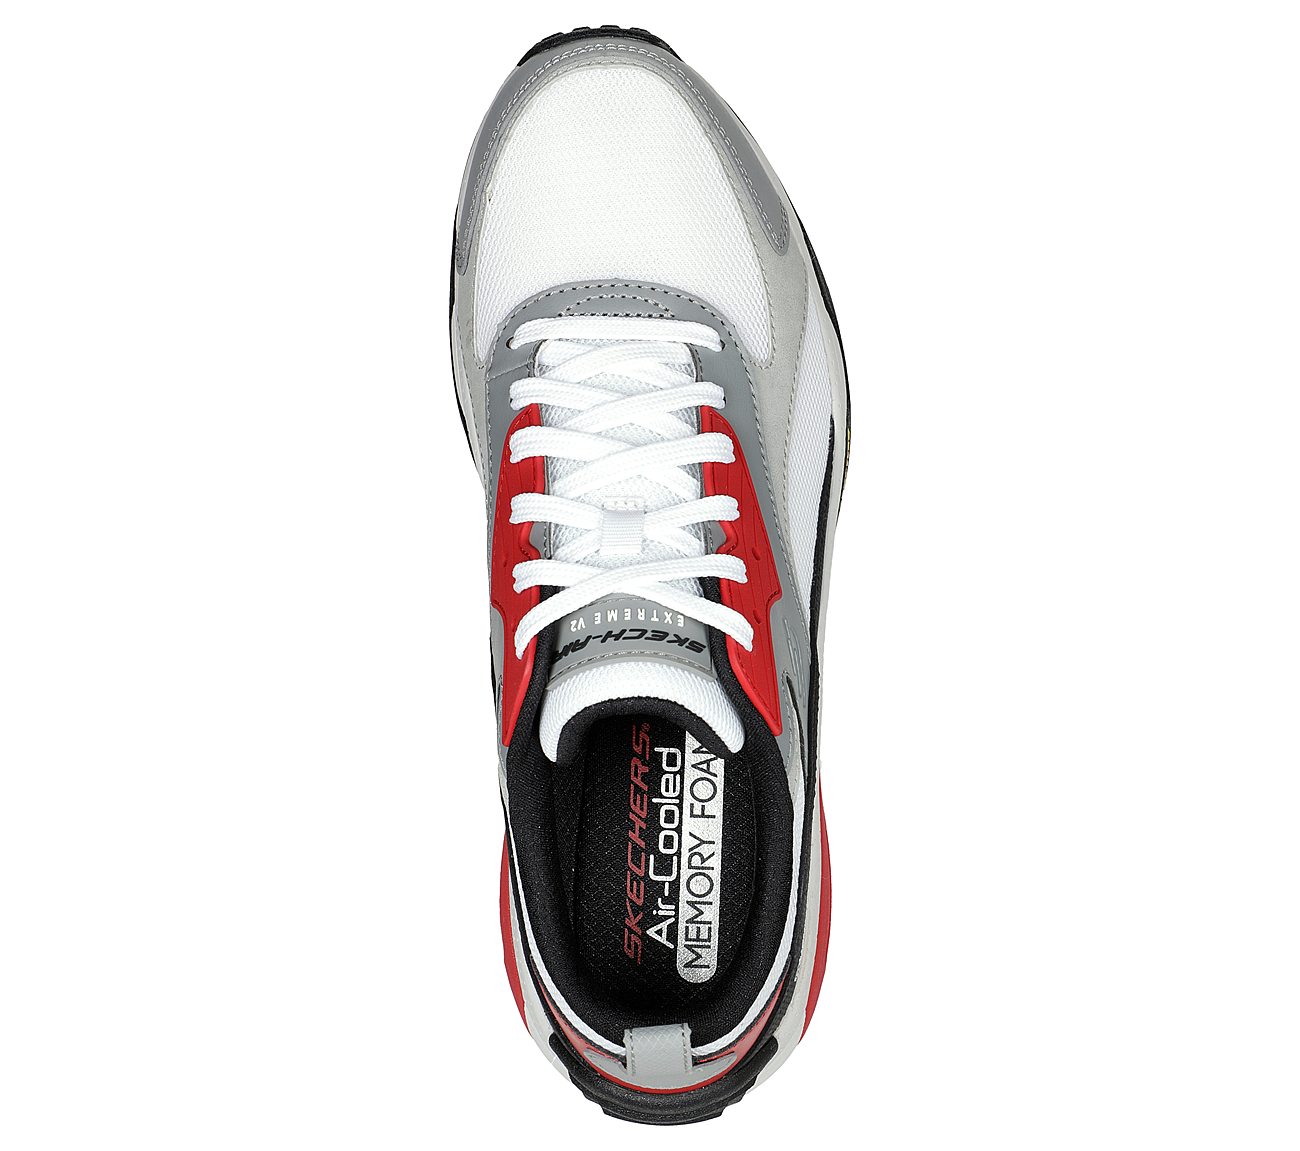 SKECH-AIR EXTREME V2, WWHITE/BLACK/RED Footwear Top View